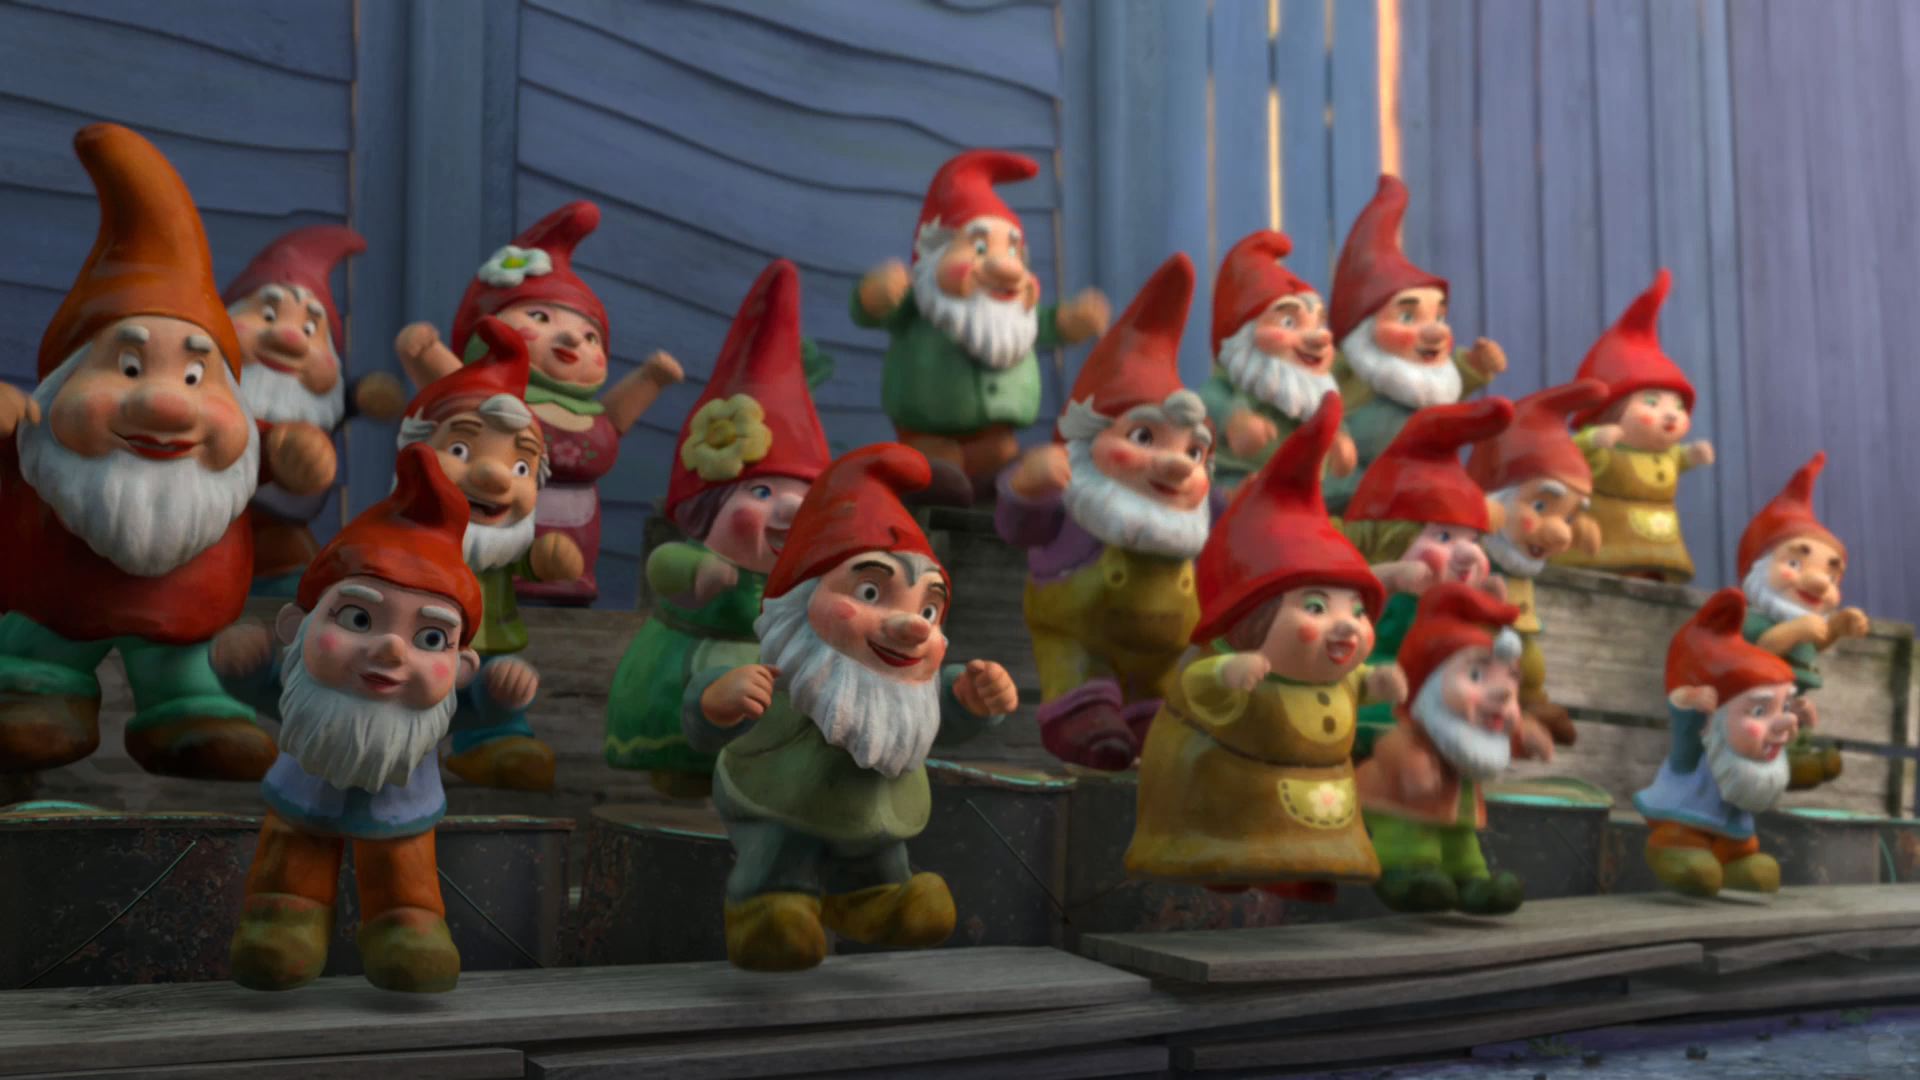 Red Garden Gnomes From Gnomeo And Juliet Desktop Wallpaper